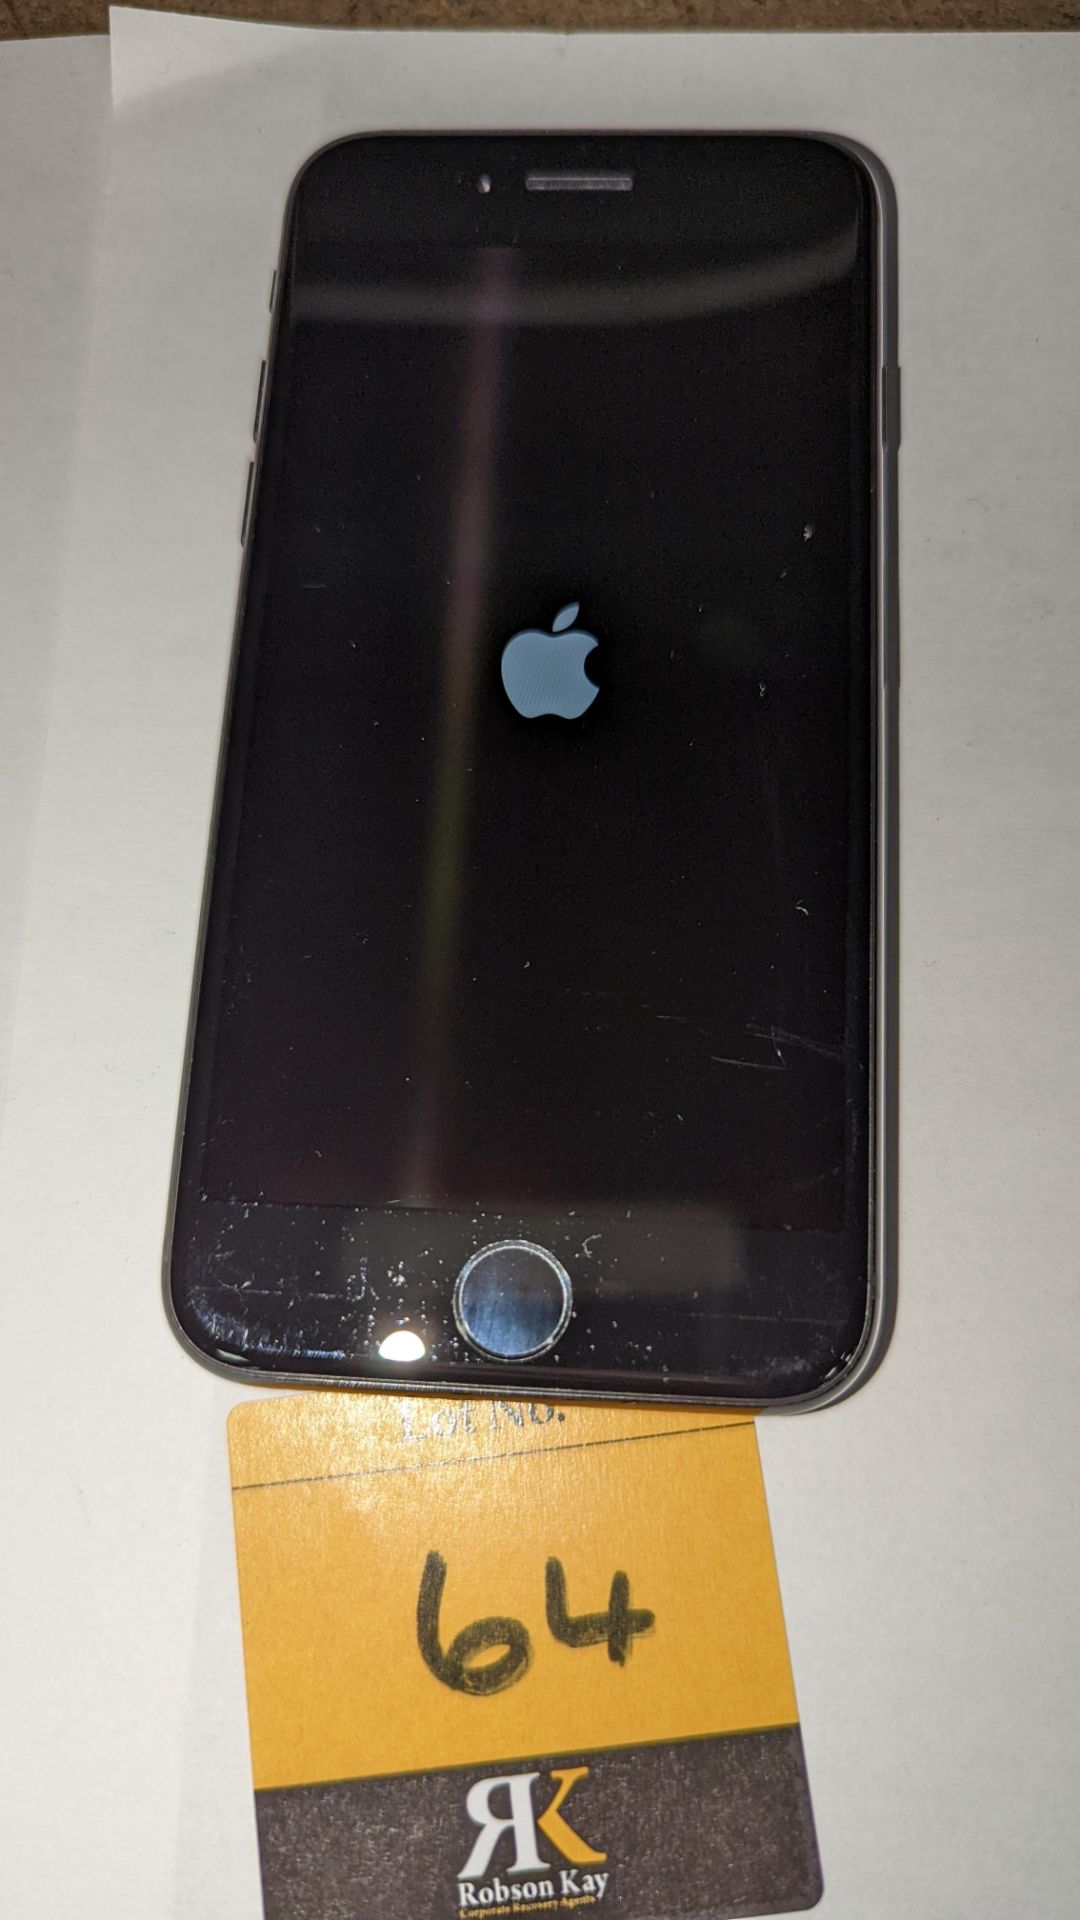 Apple iPhone 7, 32GB capacity, model A1778. No ancillaries or accessories - Image 12 of 14